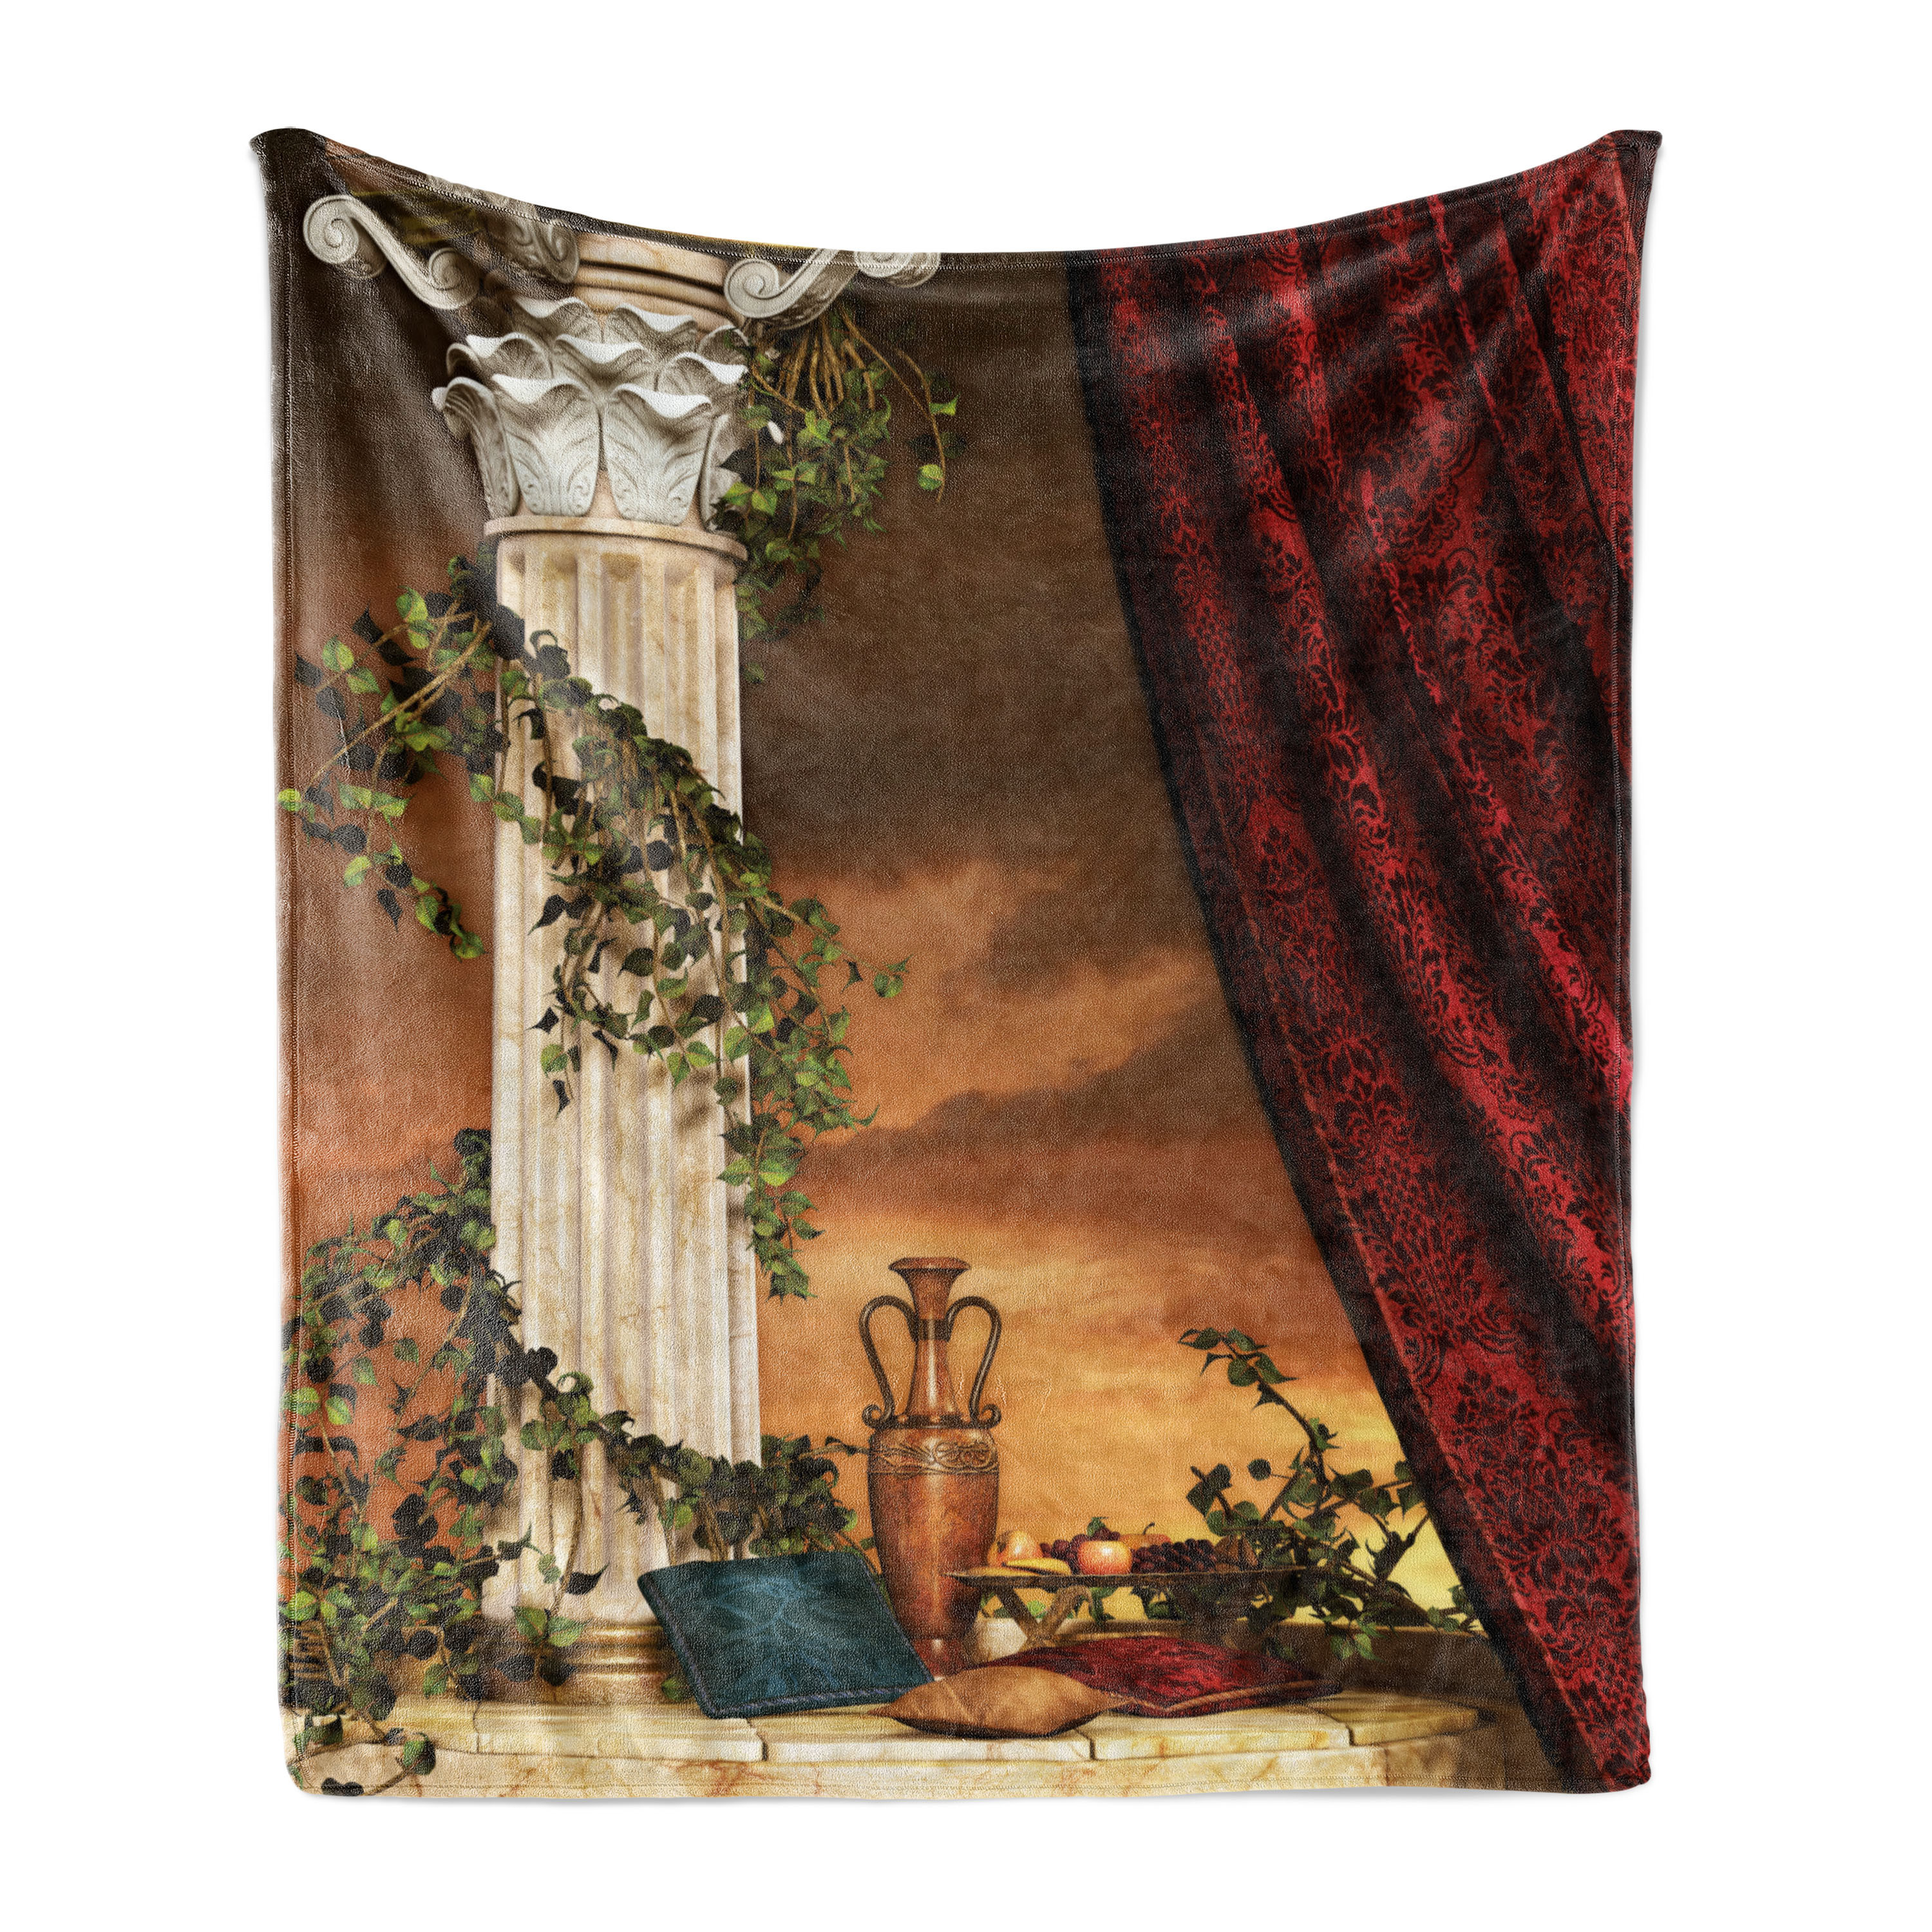 Gothic Soft Flannel Fleece Throw Blanket, Greek Style Scene Climber Pillow Fruits Vine and Red Curtain Sunset, Cozy Plush for Indoor and Outdoor Use, 50" x 60", Multicolor, by Ambesonne - image 1 of 5